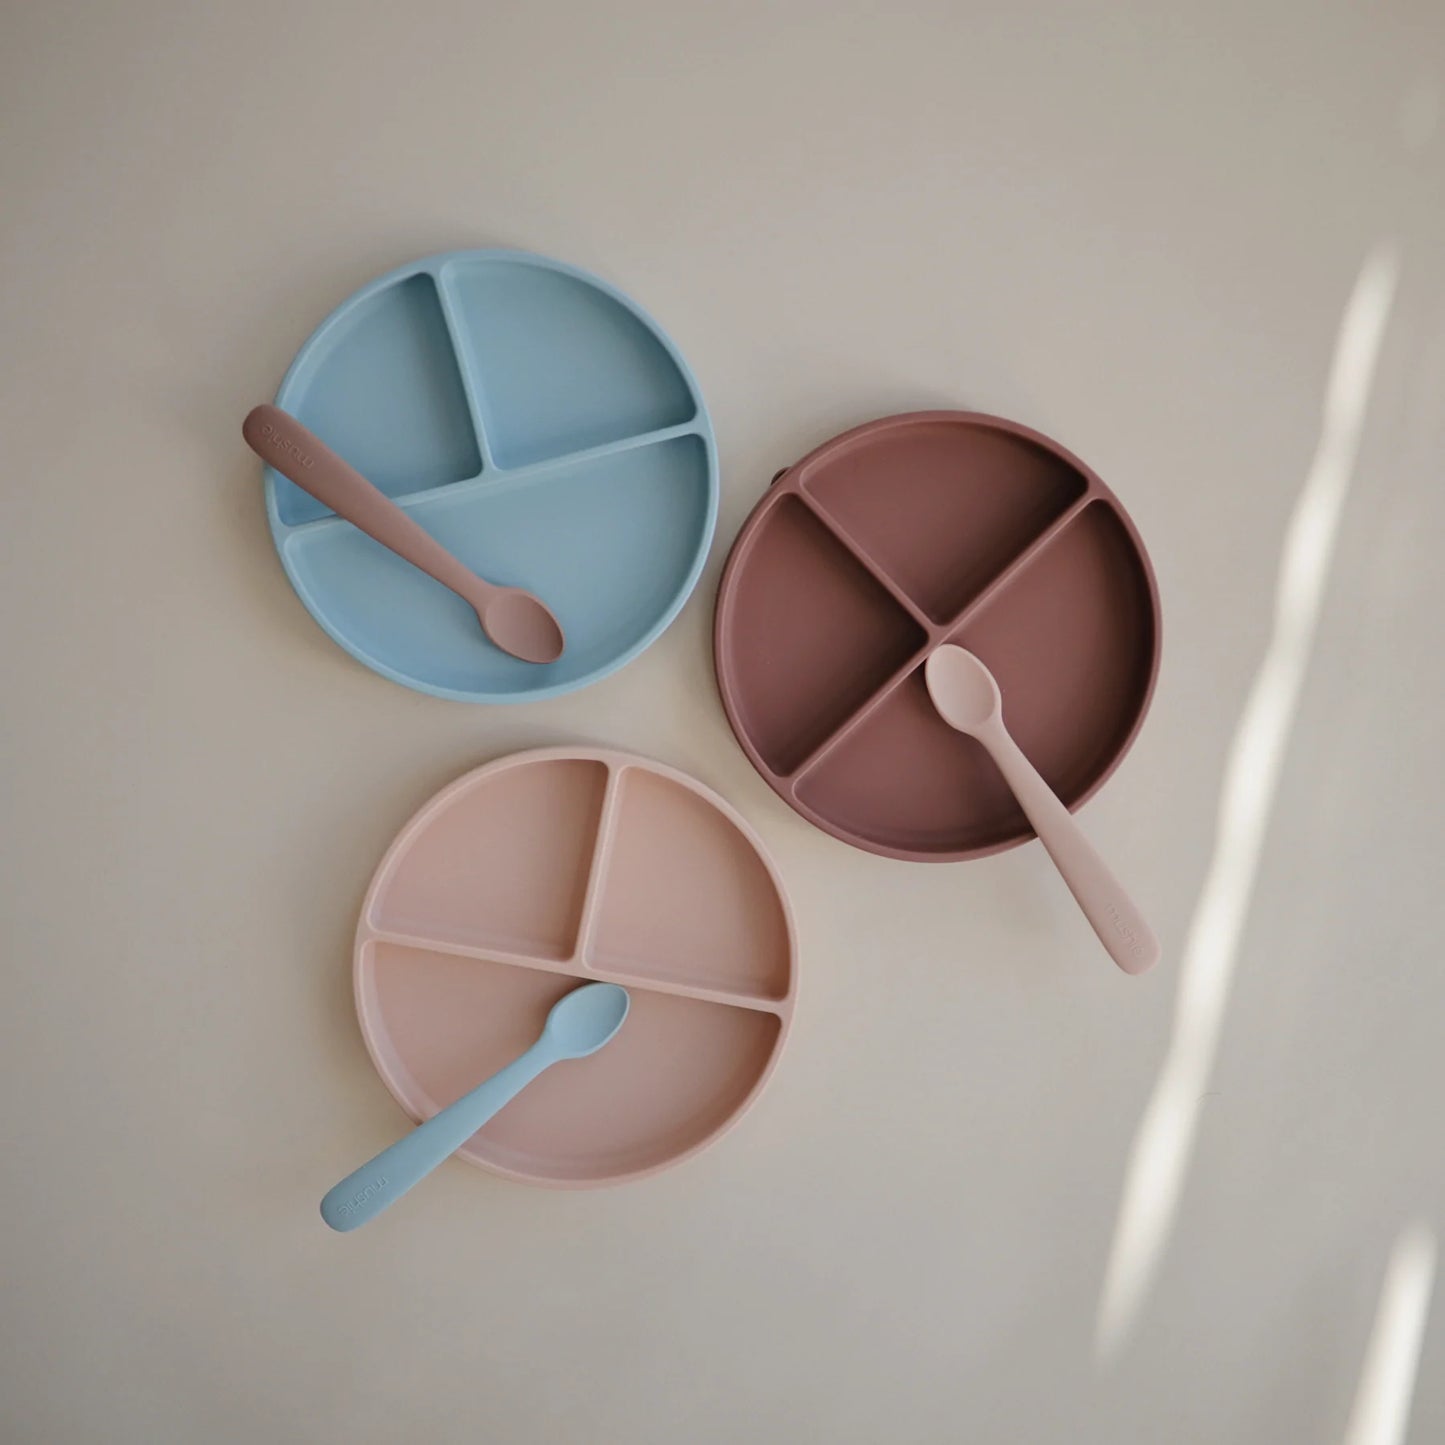 Silicone Feeding Spoons 2 Pack - Stone/Cloudy Mauve